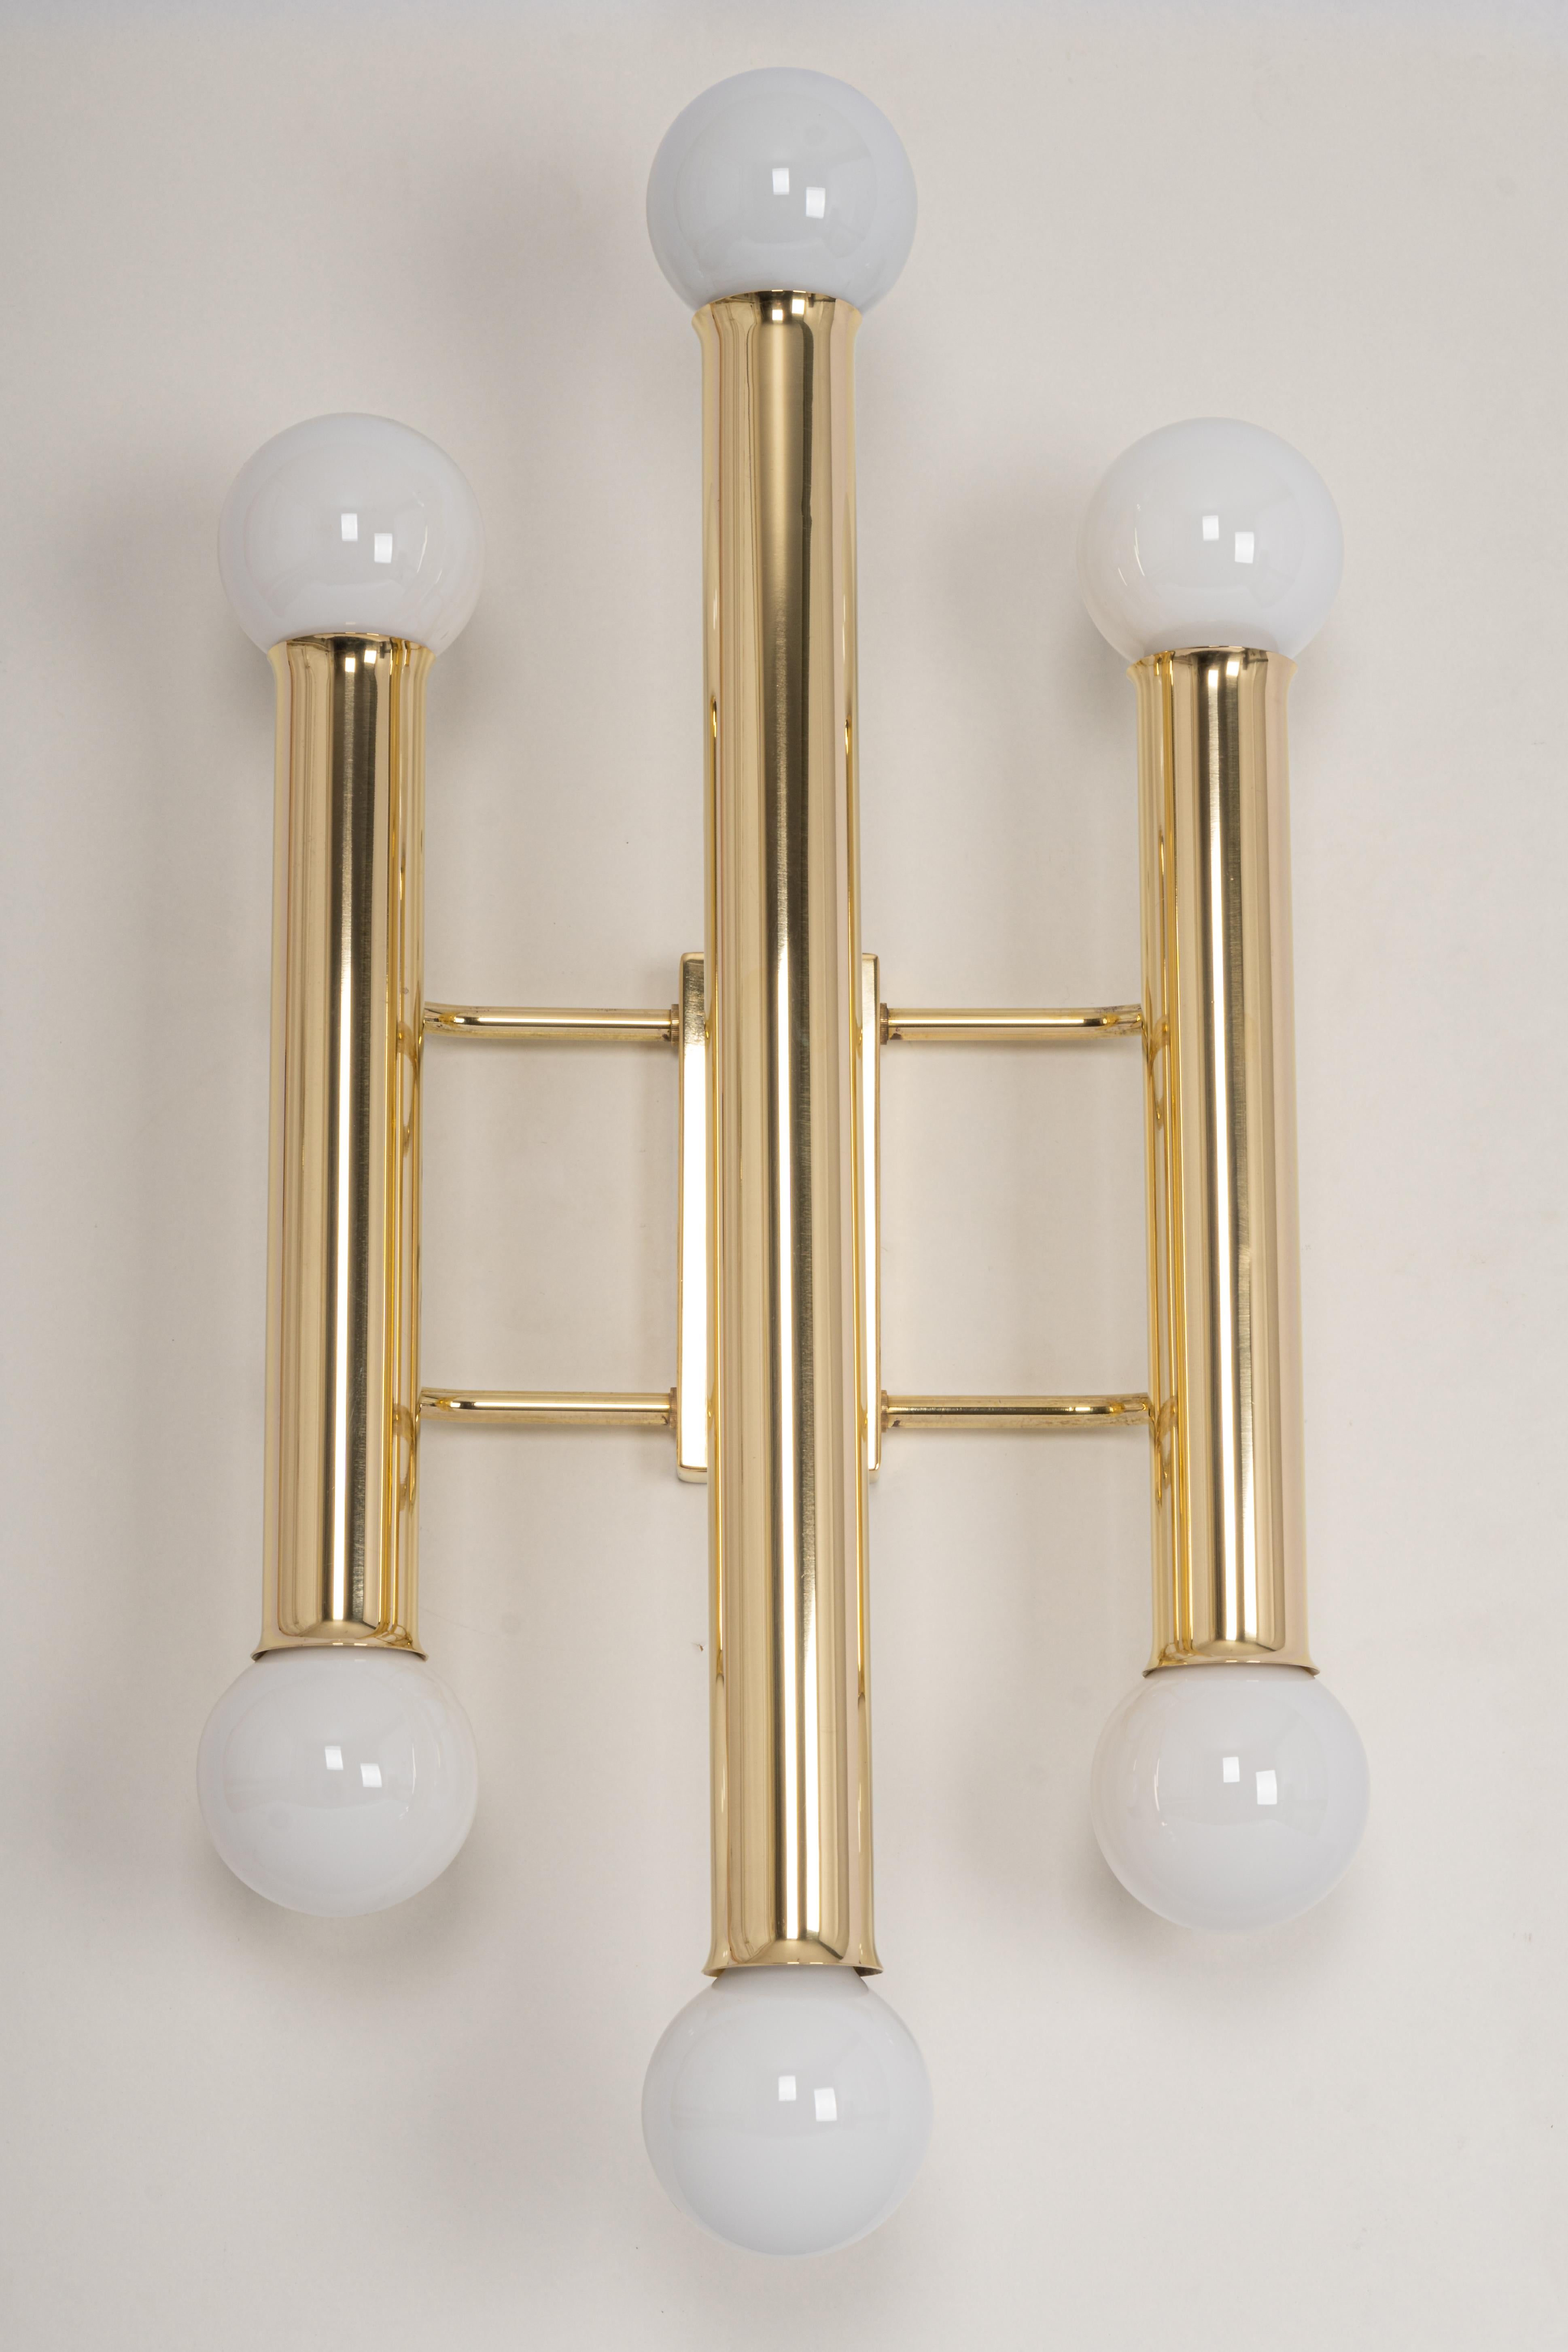 Large Italian Brass wall sconce Sciolari style, 1970s.
Each wall light needs 6 x E27 Standard bulb.
Light bulbs are not included. It is possible to install this fixture in all countries (US, UK, Europe, Asia, Australia,..)
Good condition.
Please